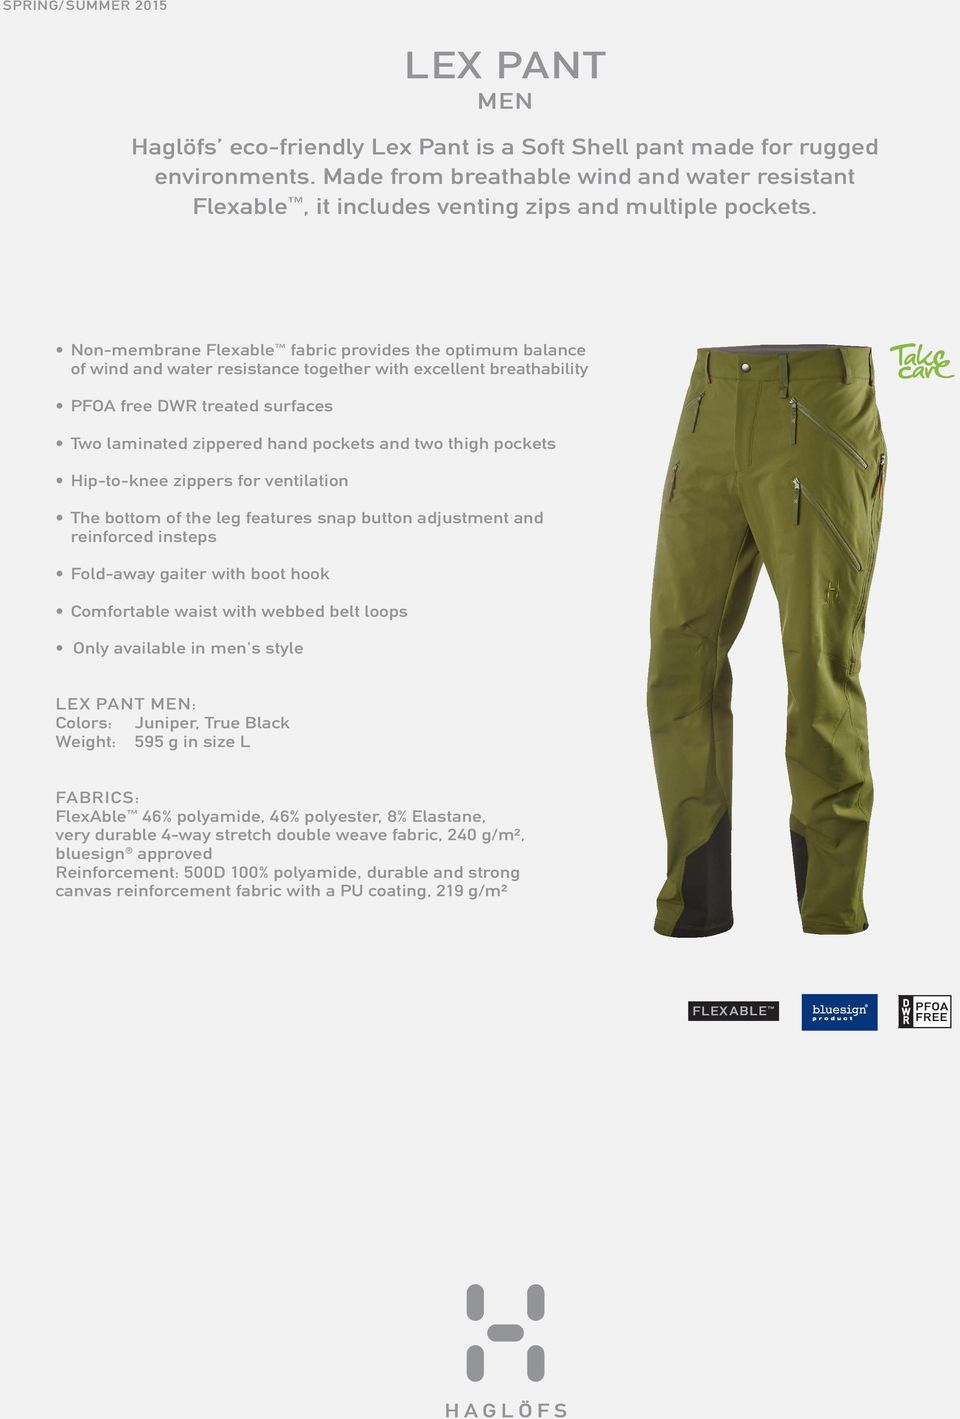 thigh pockets Hip-to-knee zippers for ventilation The bottom of the leg features snap button adjustment and reinforced insteps Fold-away gaiter with boot hook Comfortable waist with webbed belt loops